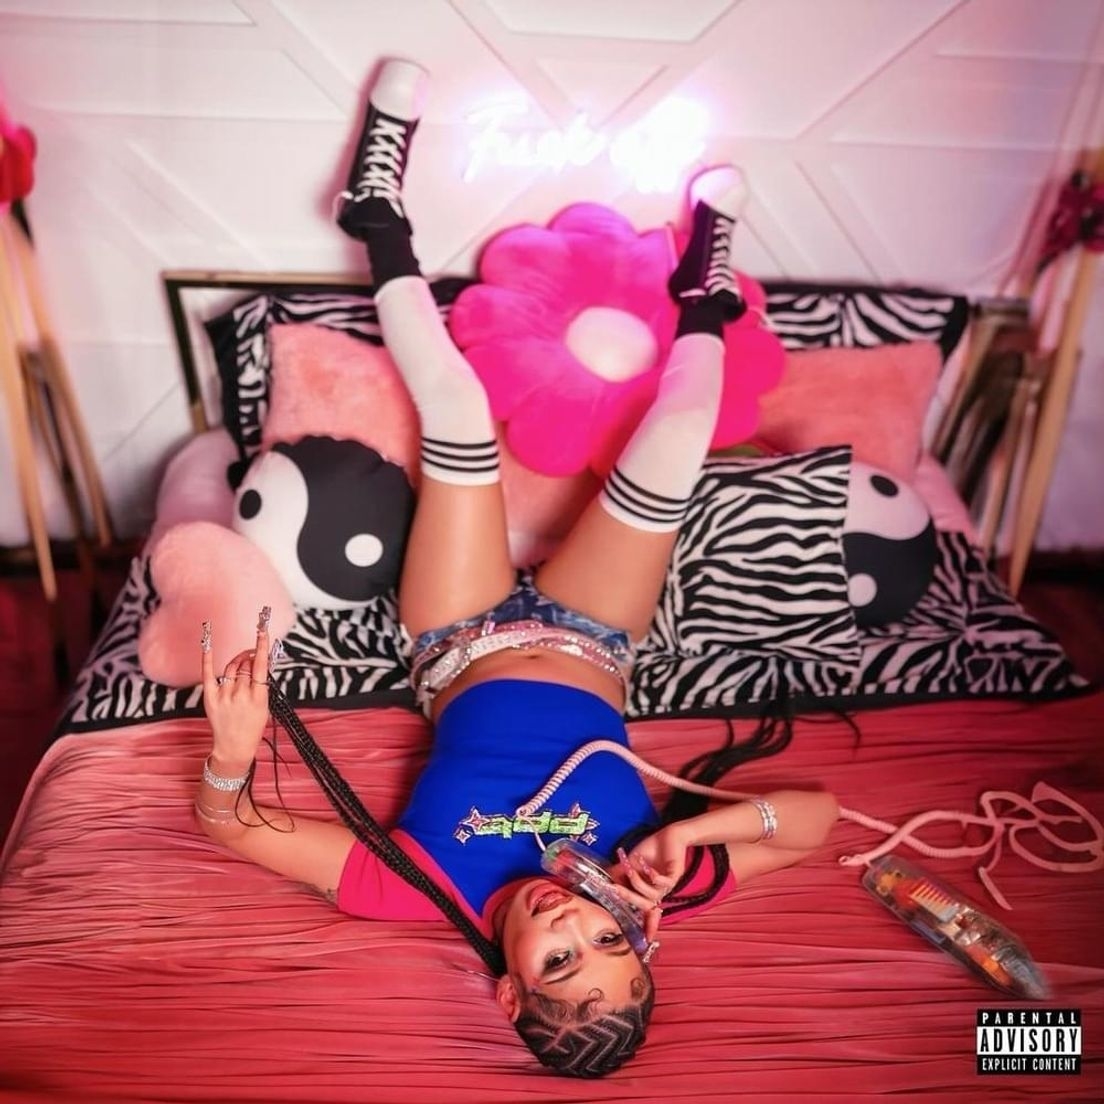 Young female musician in a playful pose on a bed with zebra print sheets, wearing a blue top, shorts, thigh-high socks, and platform sneakers. Neon sign above her